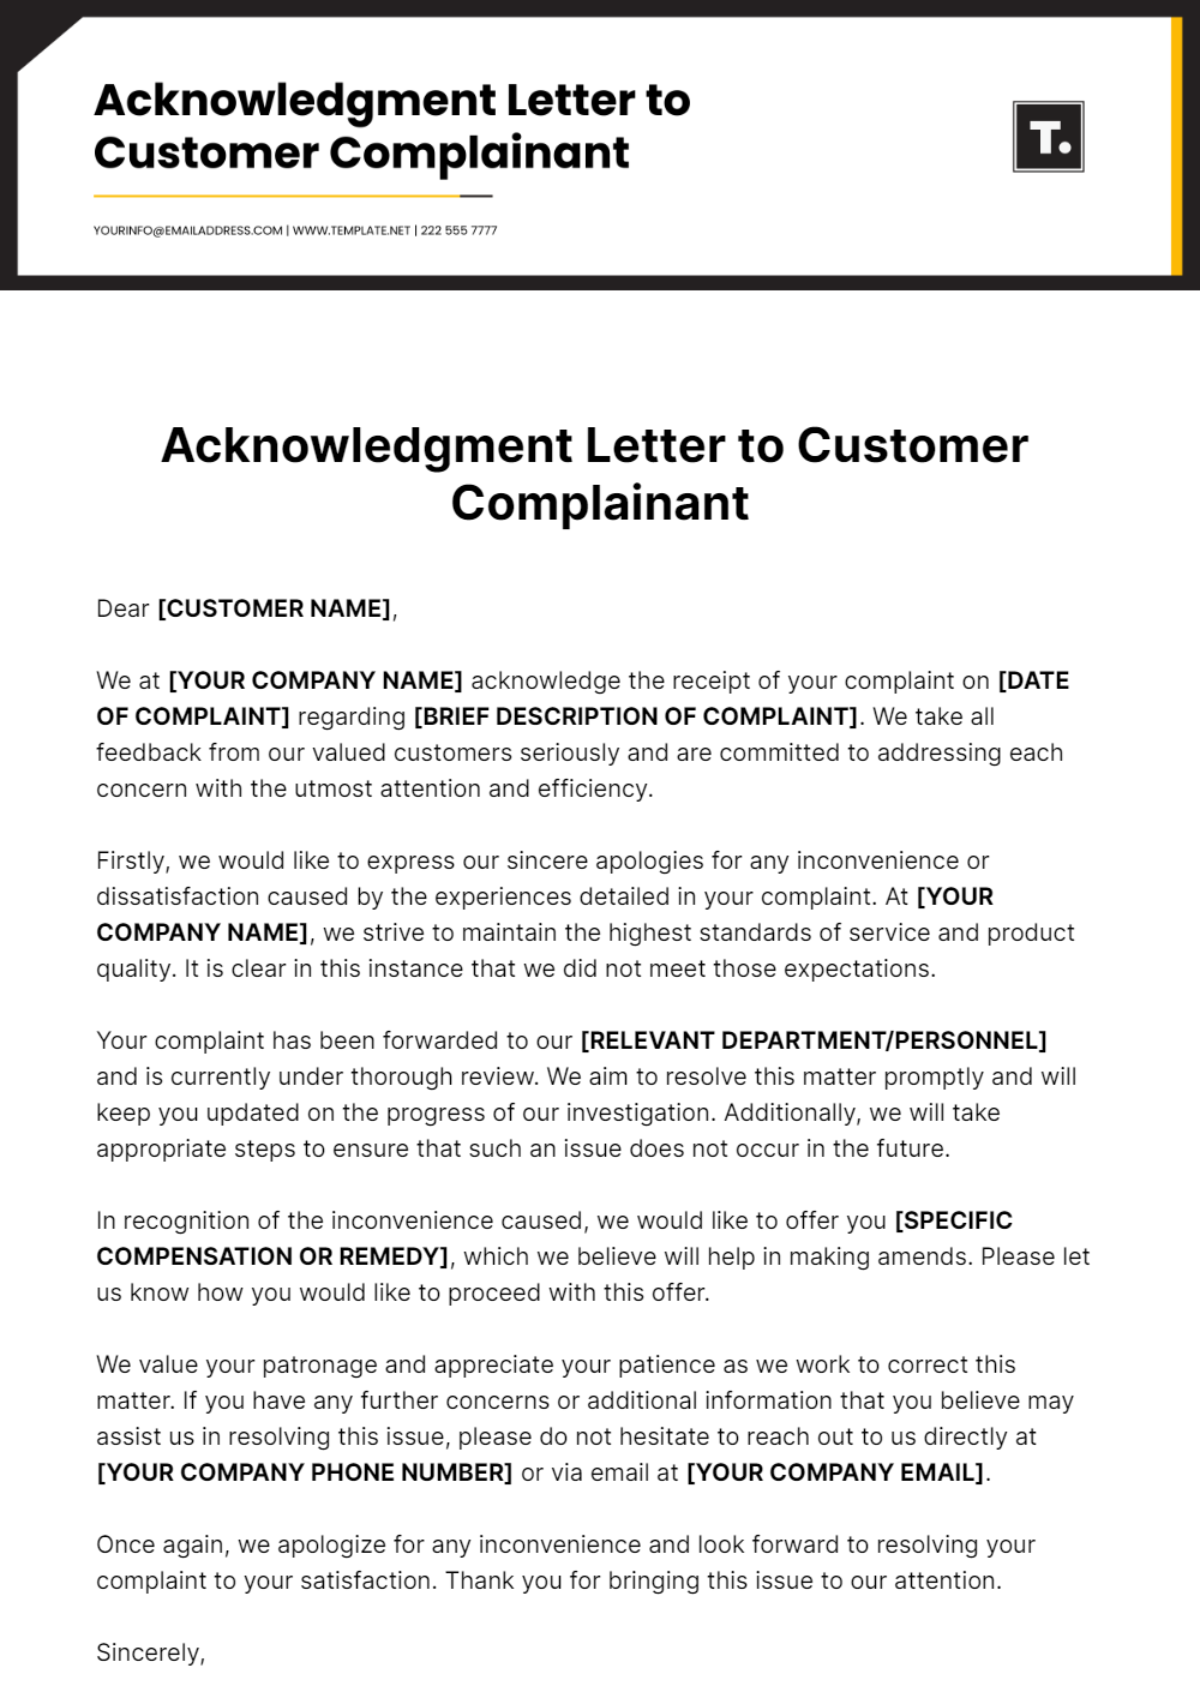 Acknowledgment Letter To Customer Complainant Template